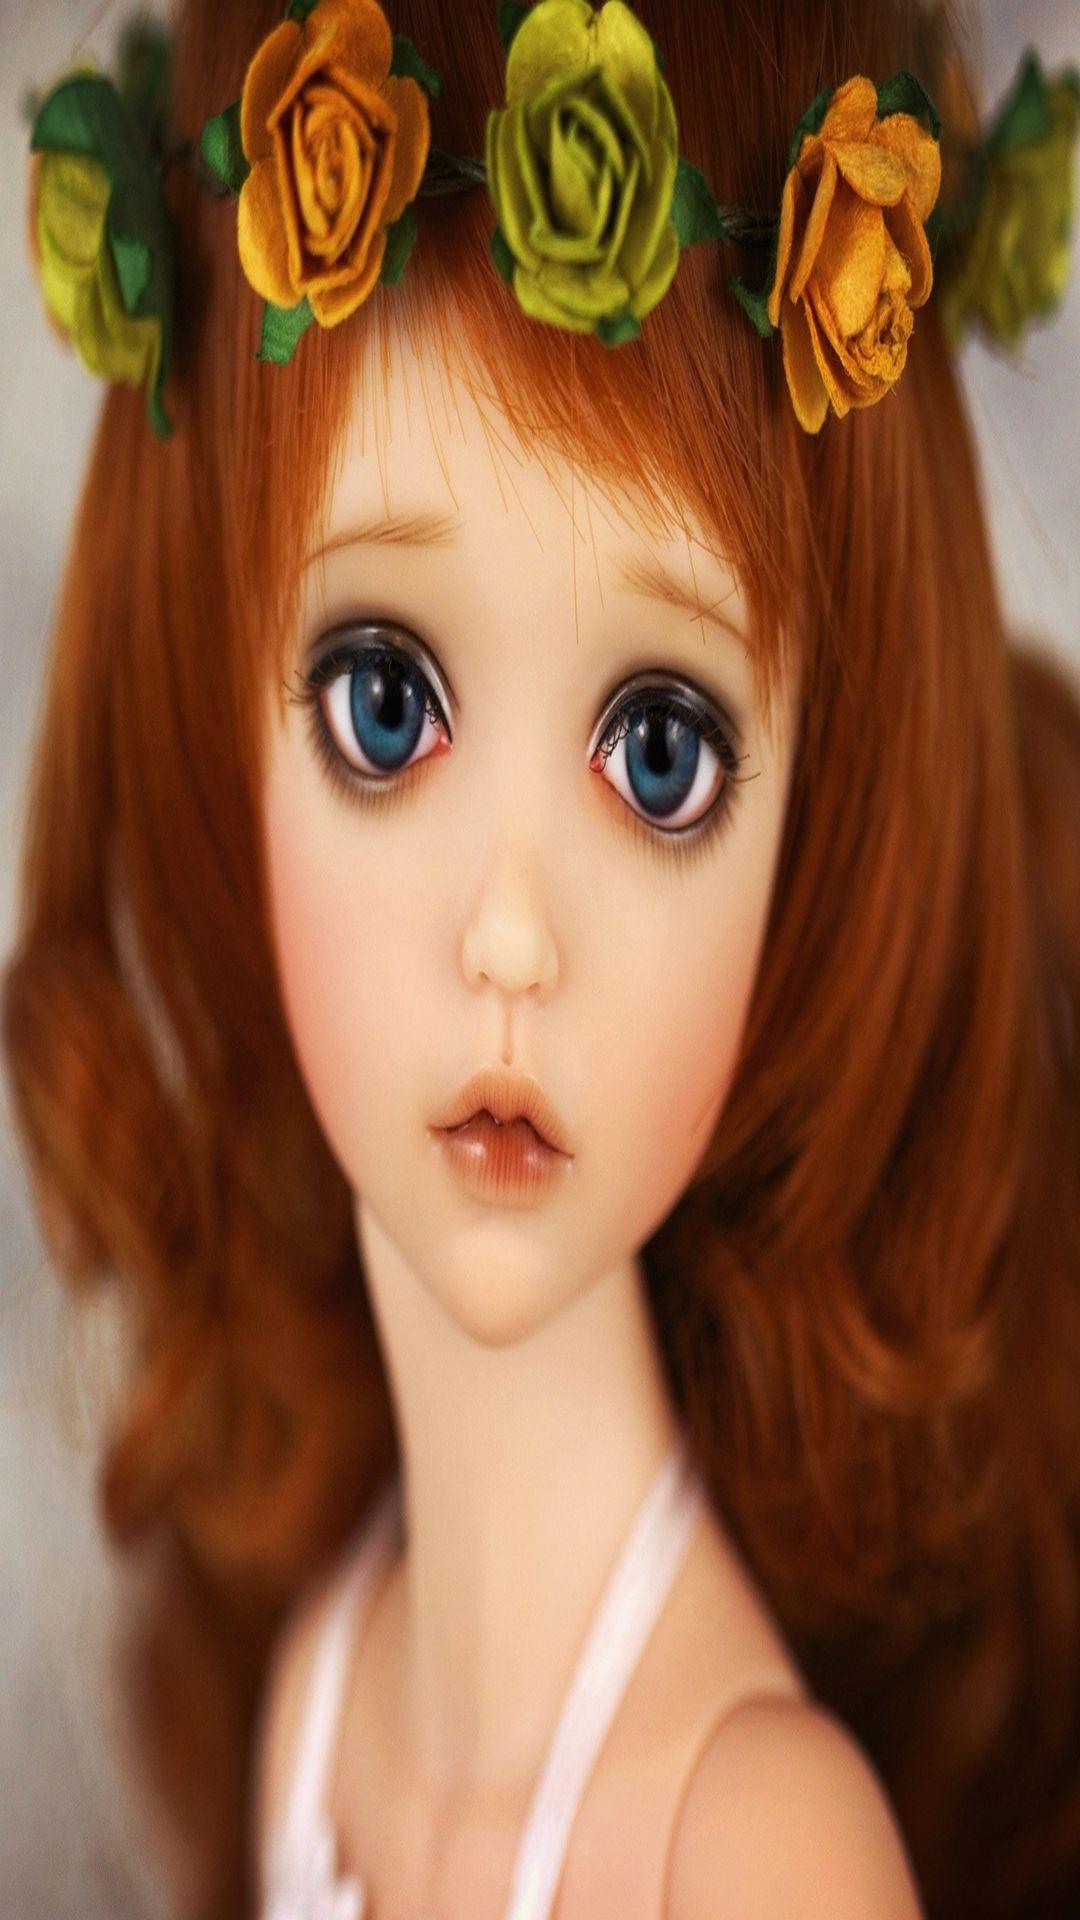 Cute doll sad emoction iphone wallpaper